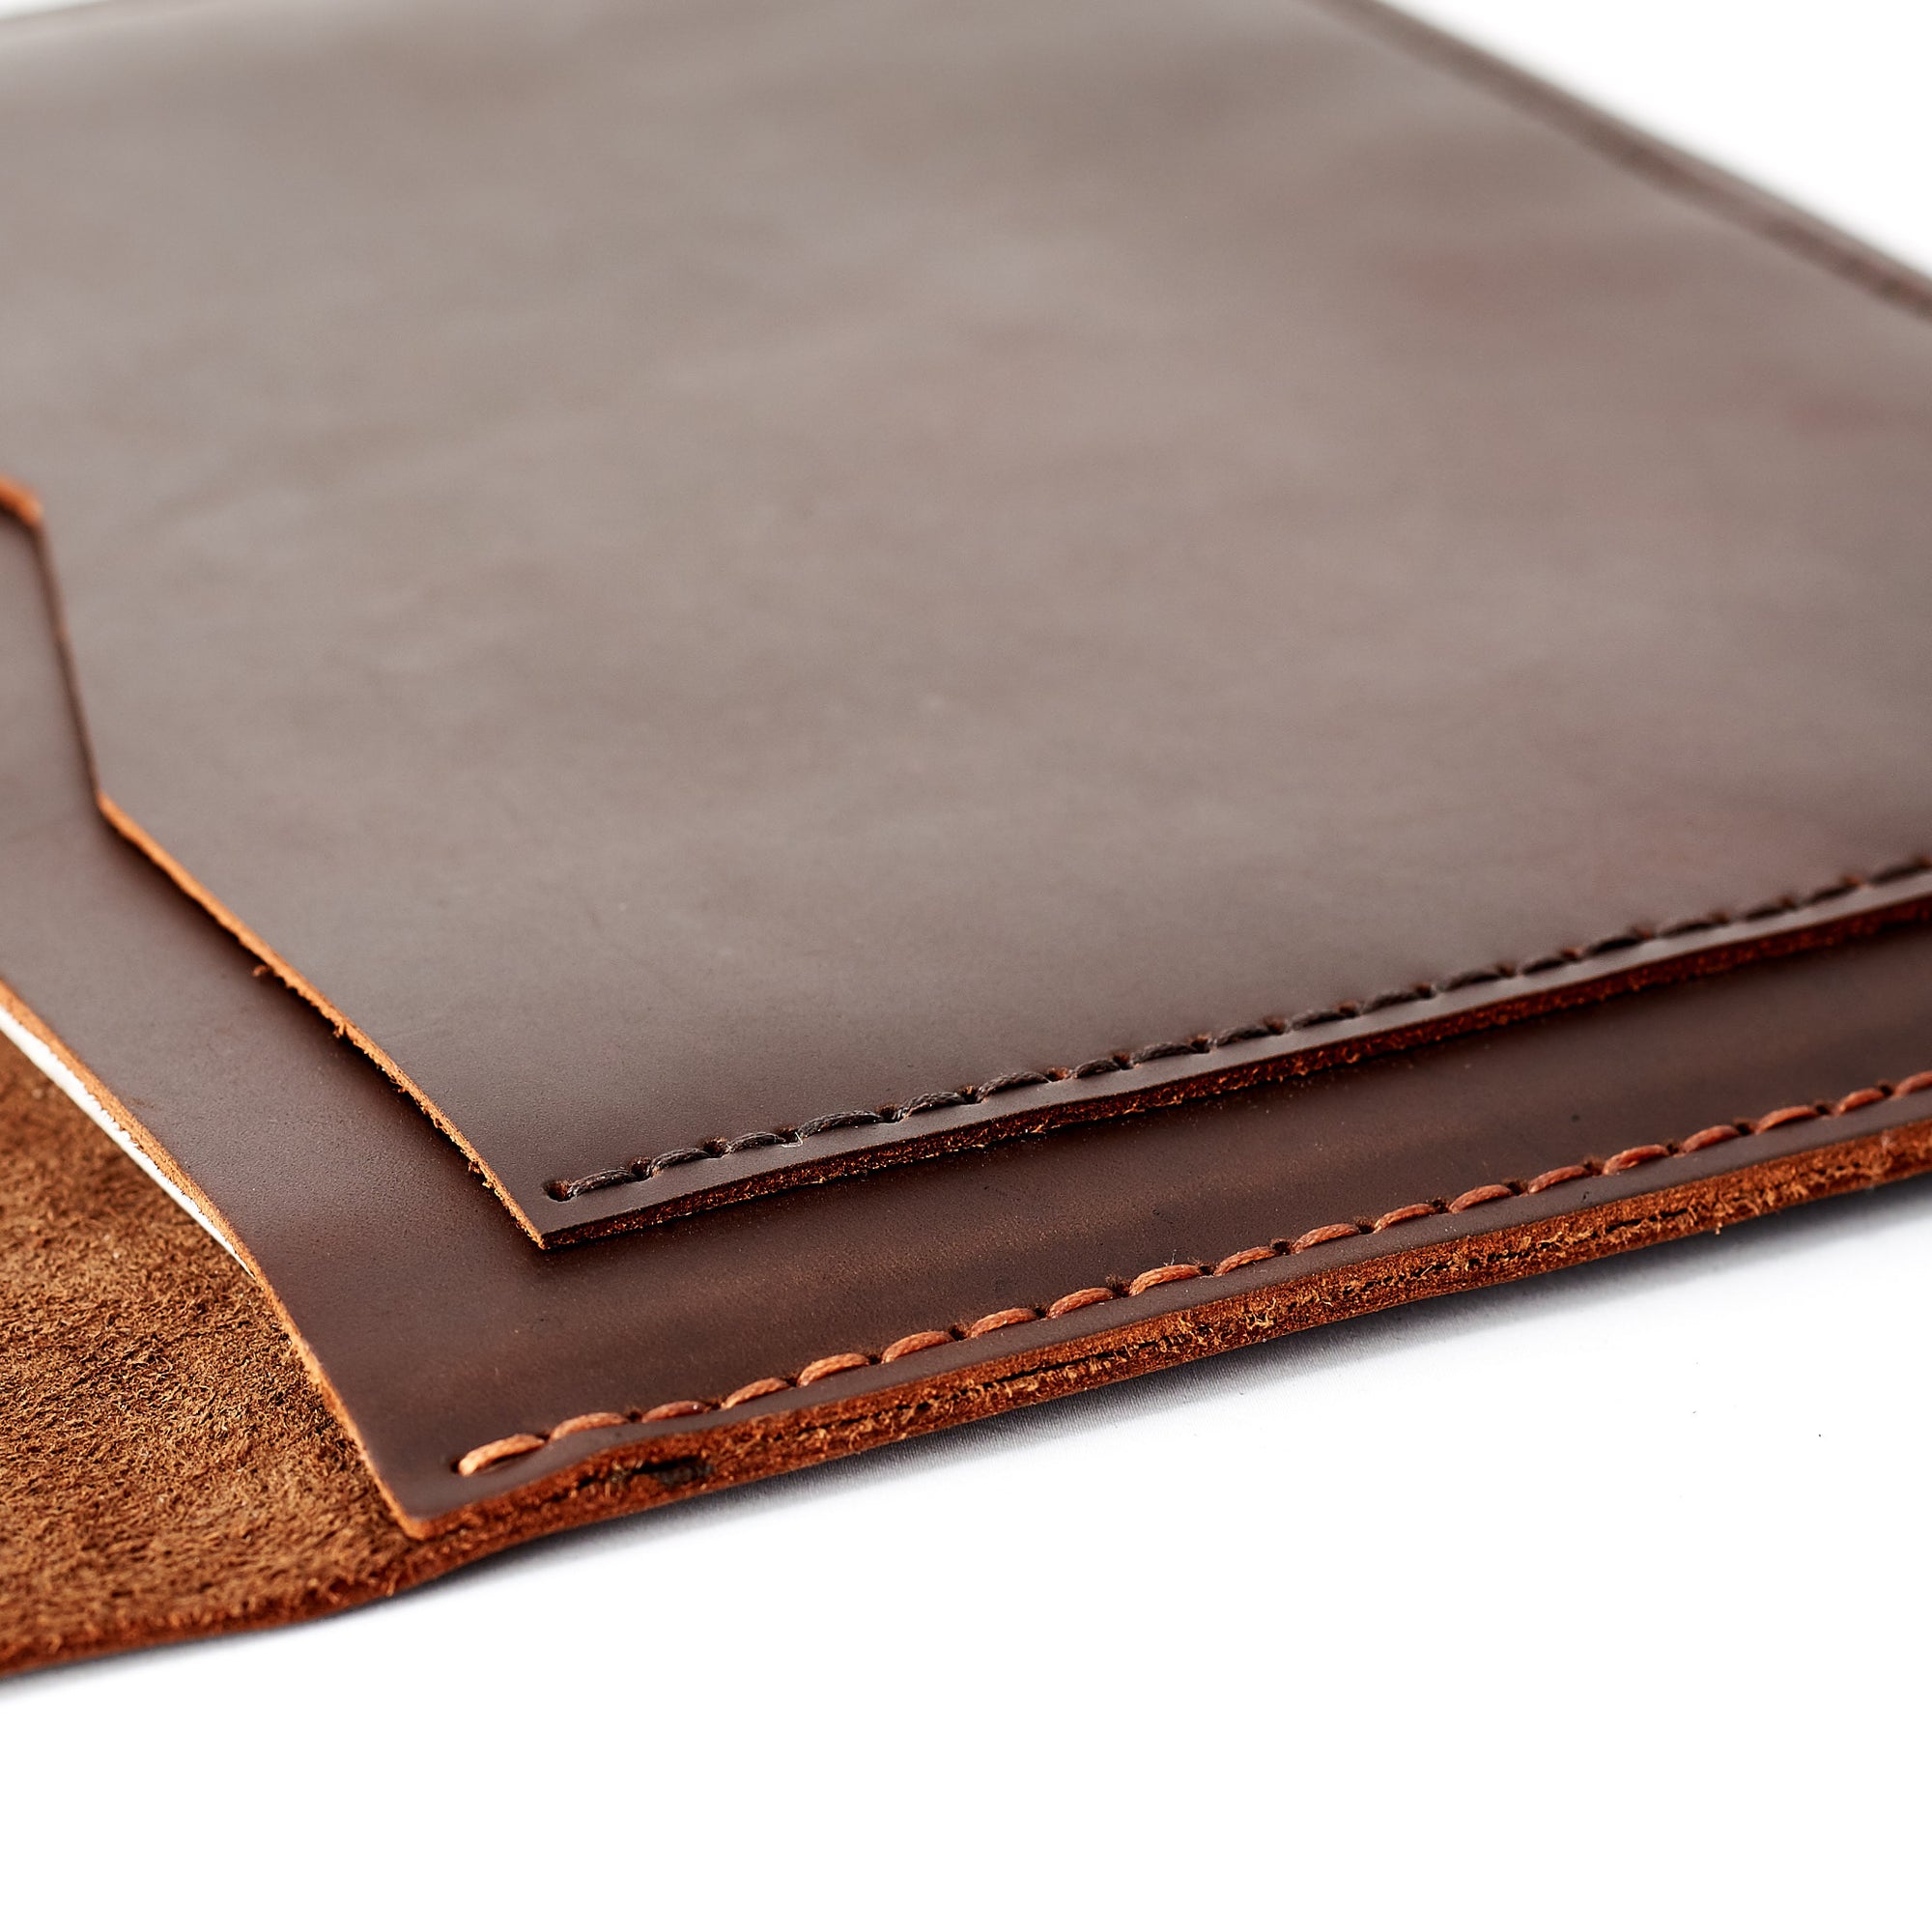 Detail Hand Made Stitching. Brown Leather MacBook Case. Postman MacBook Sleeve by Capra Leather